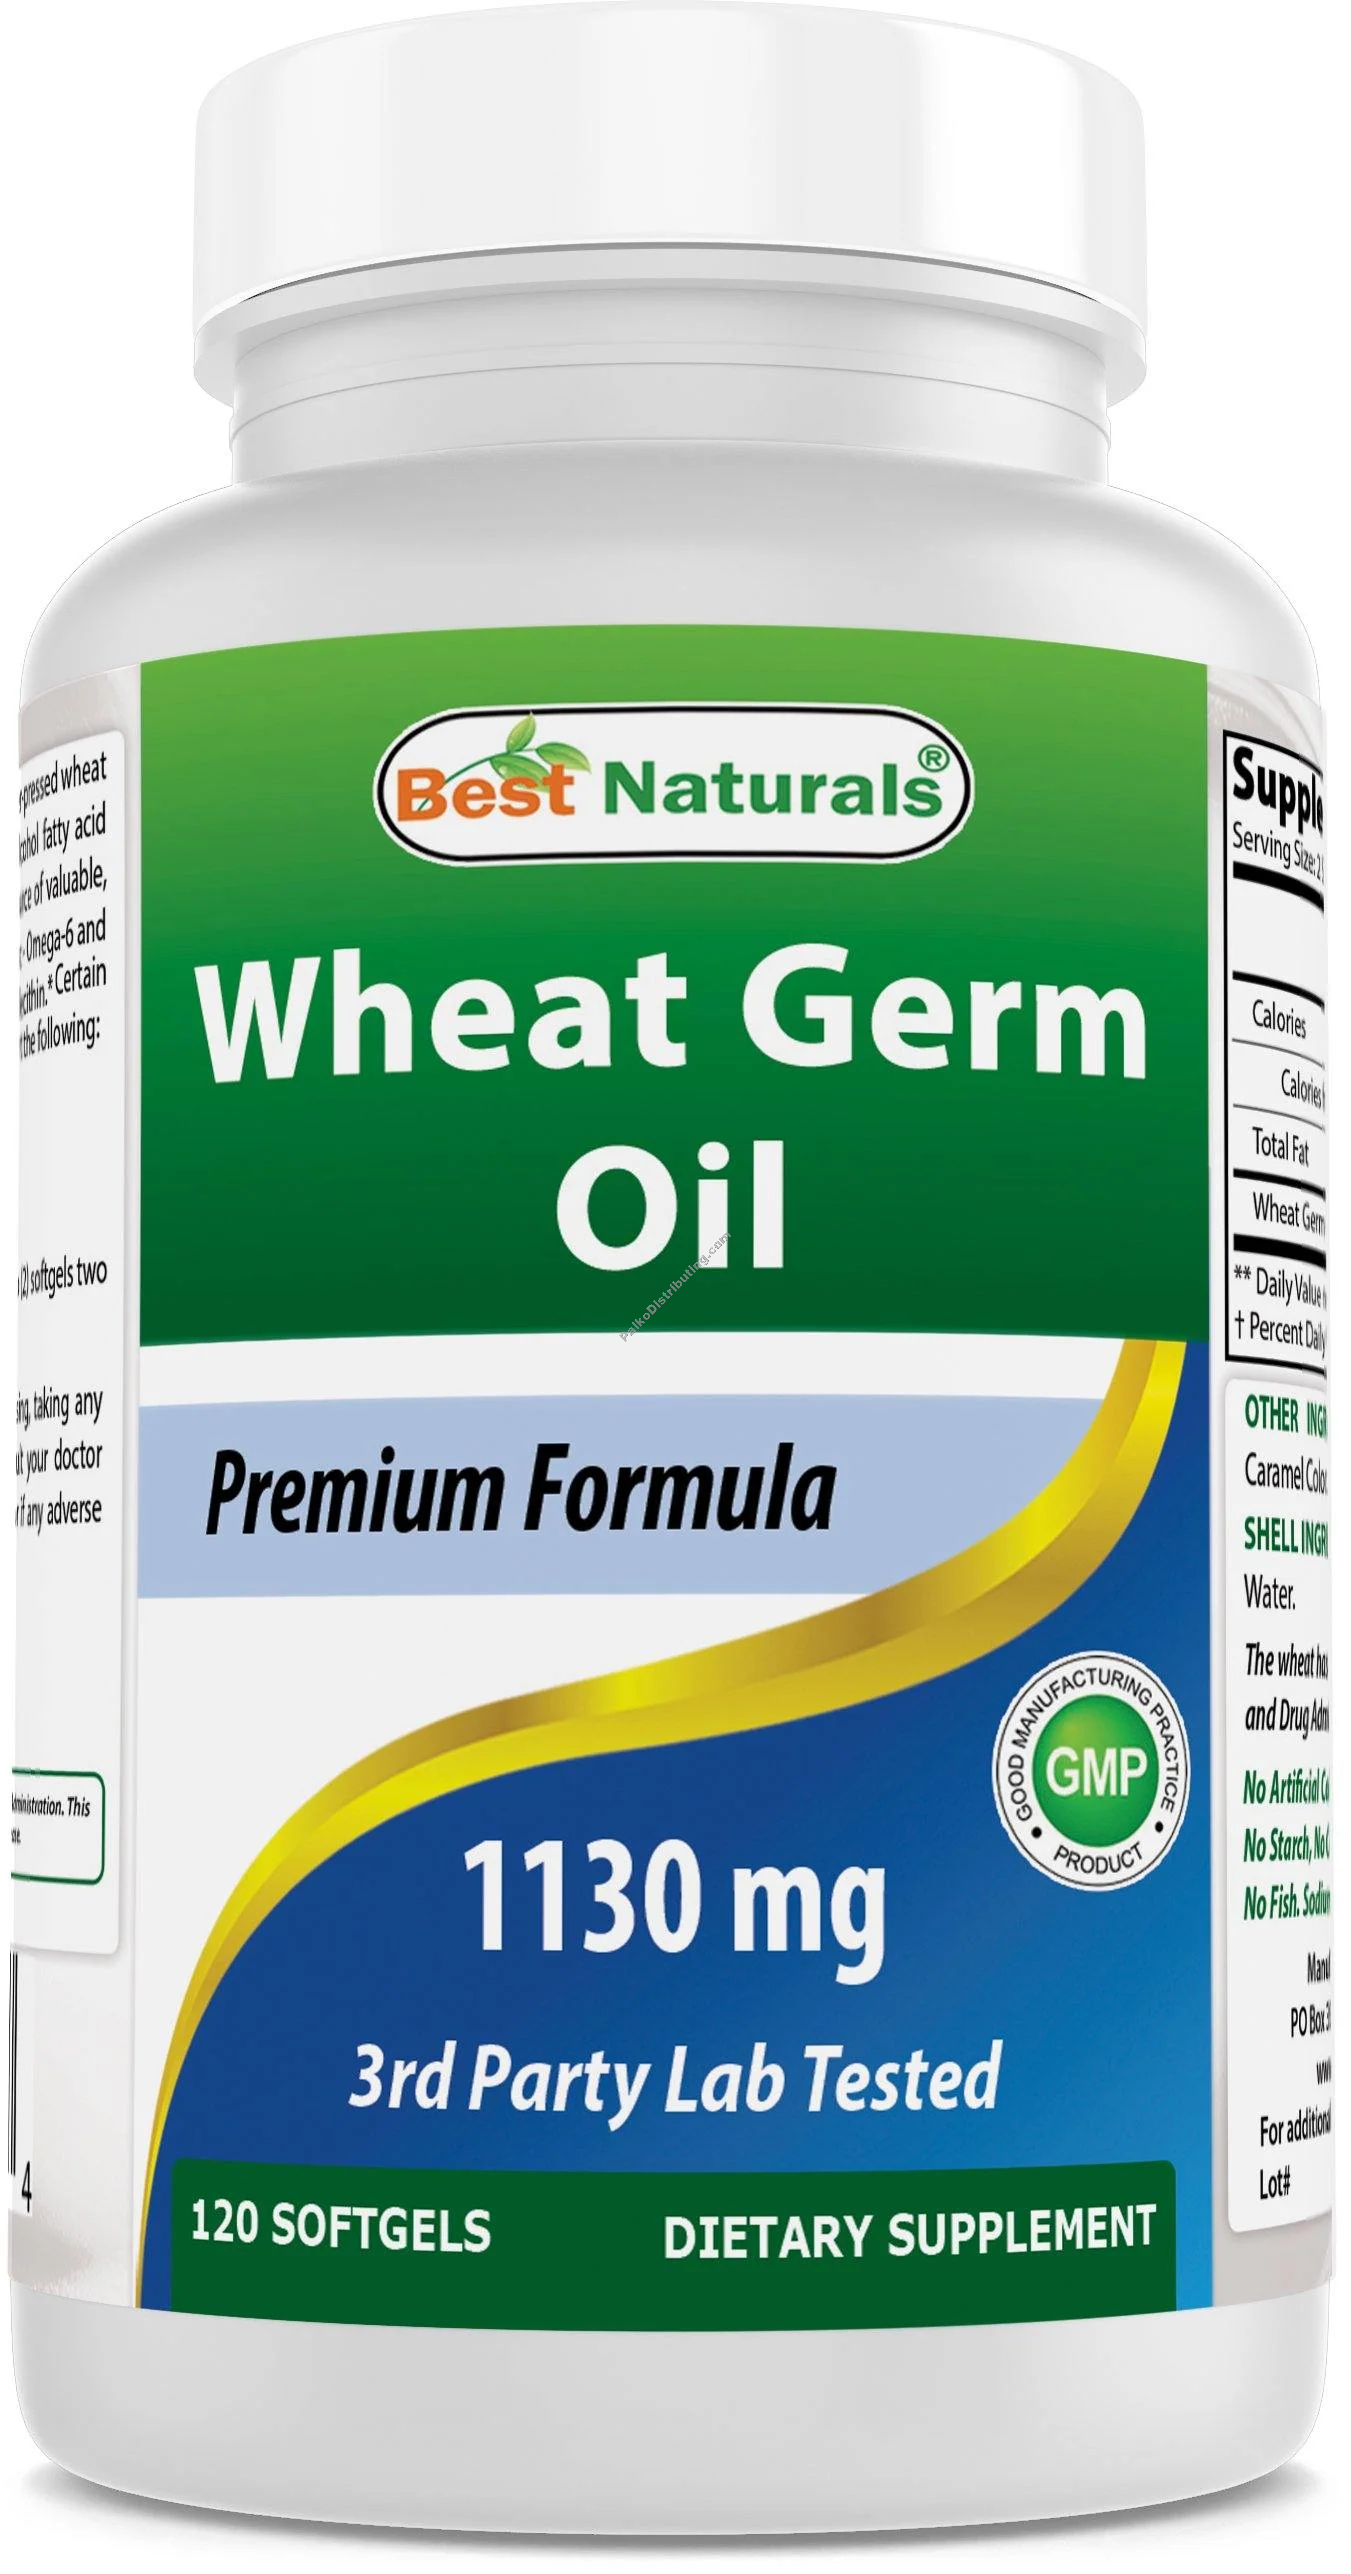 Product Image: Wheat Germ Oil 1130 mg